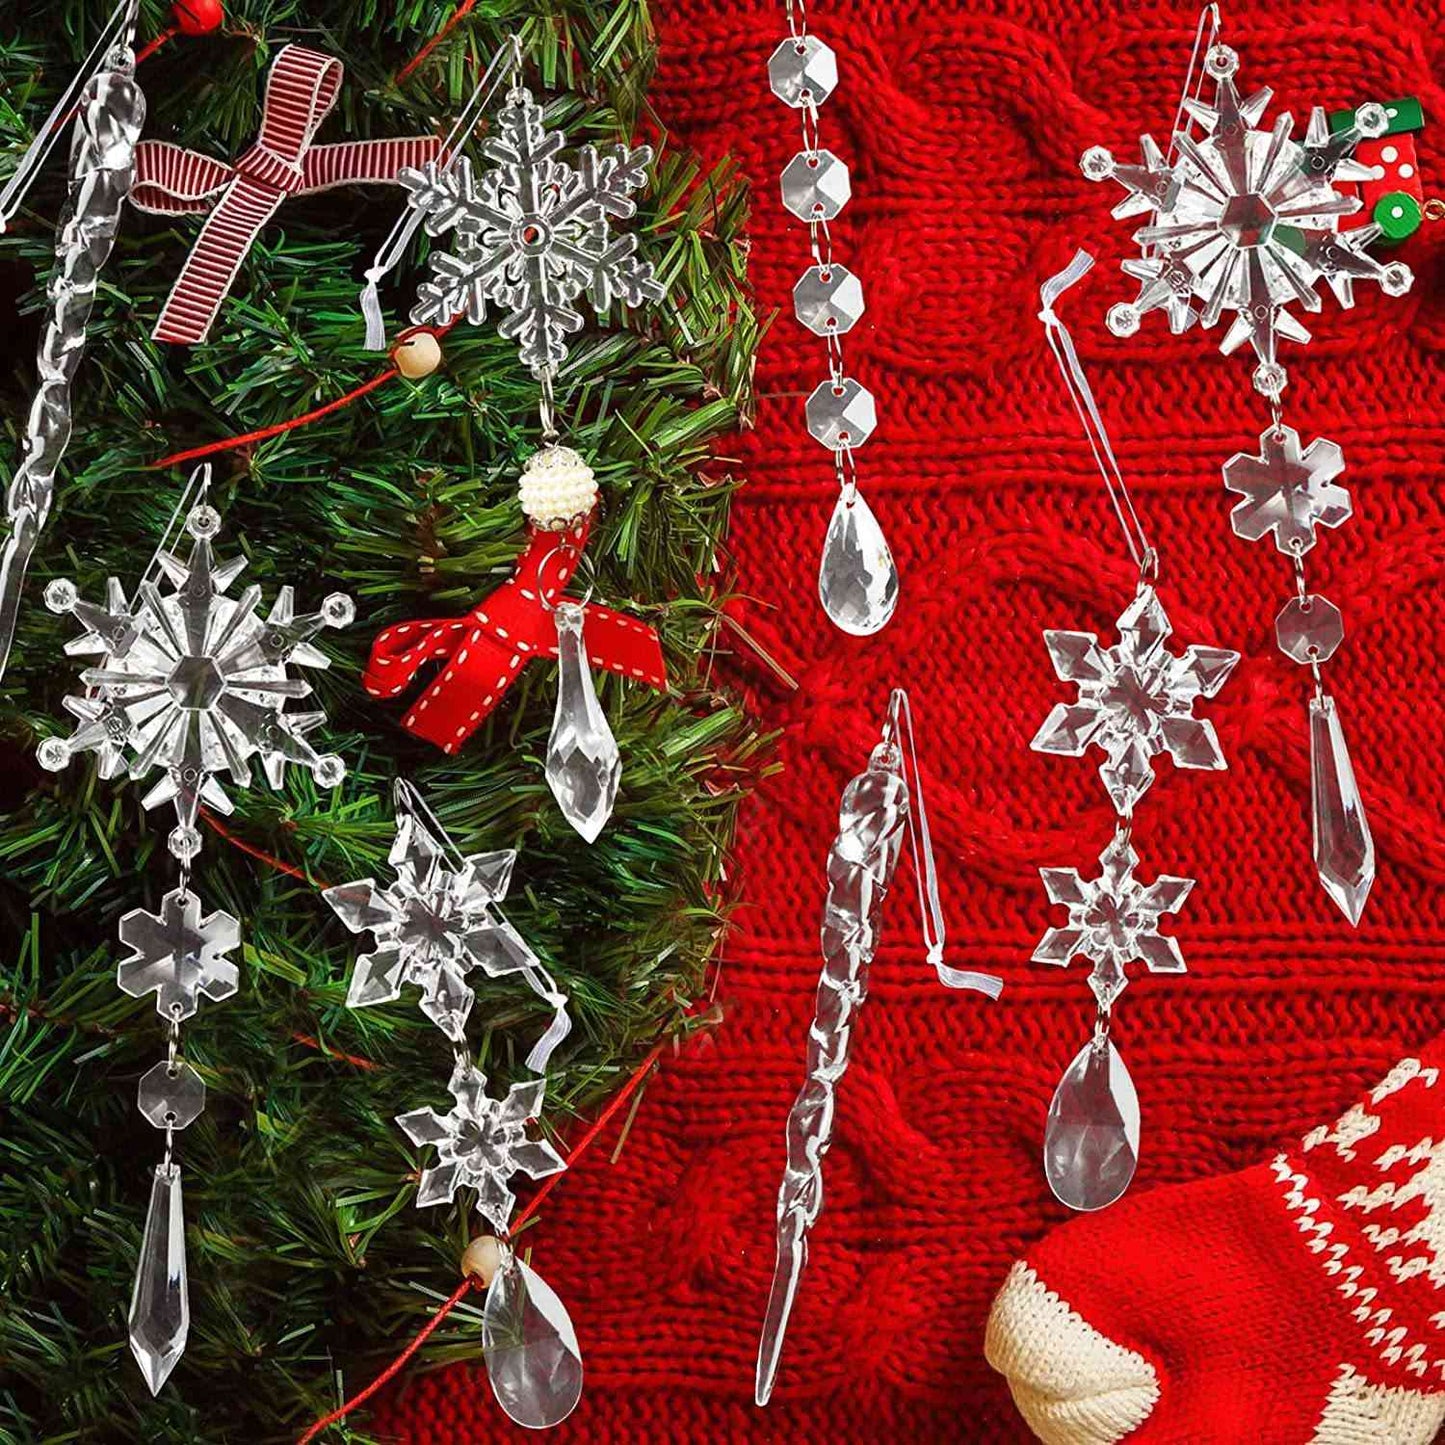 10-Piece Acrylic Icicle Ornaments